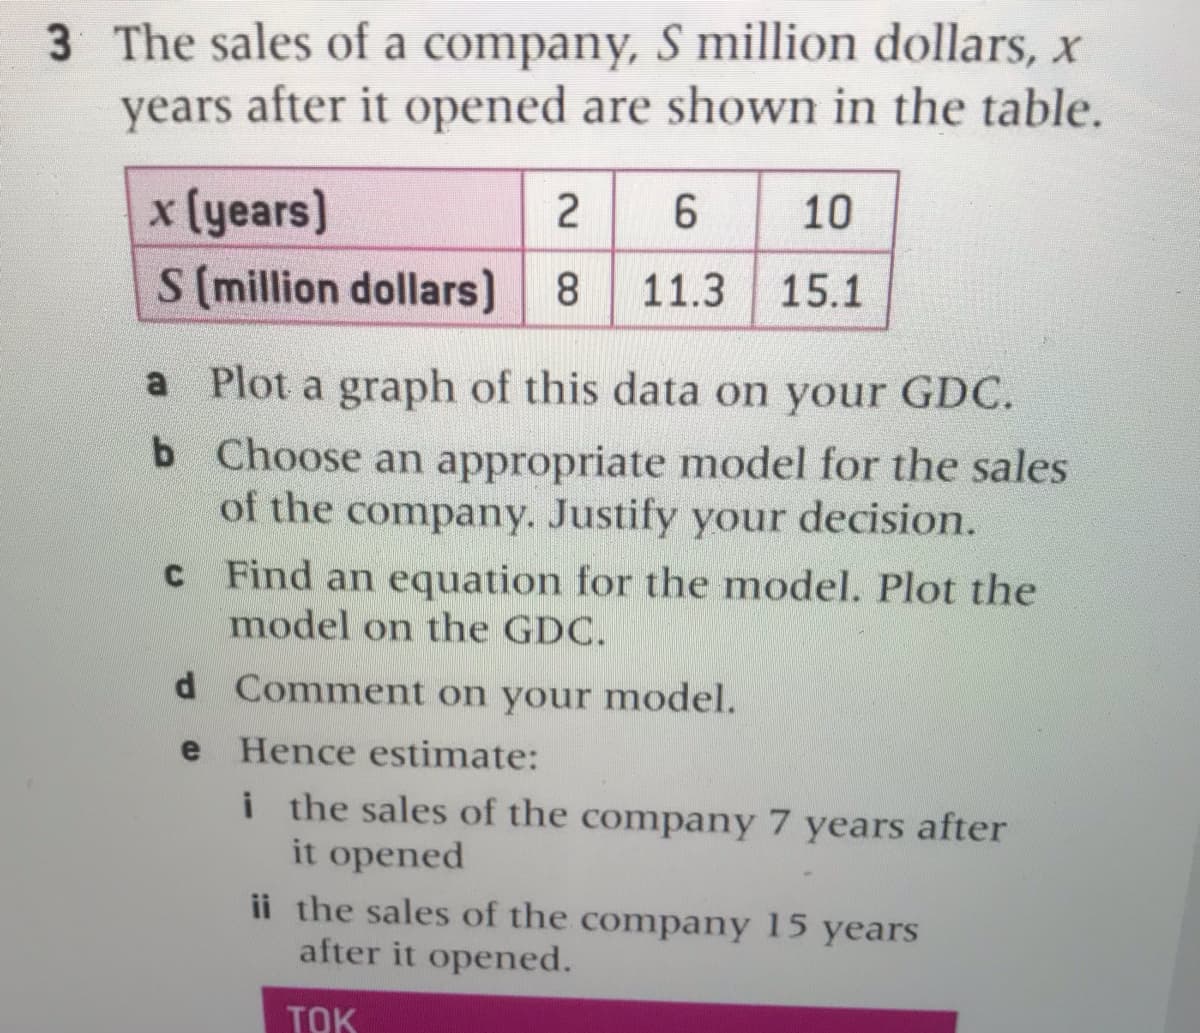 3 The sales of a company, S million dollars, x
years after it opened are shown in the table.
x (years)
S (million dollars) 8
6
10
11.3
15.1
a Plot a graph of this data on your GDC.
b Choose an appropriate model for the sales
of the company. Justify your decision.
C Find an equation for the model. Plot the
model on the GDC.
d Comment on your model.
e
Hence estimate:
i the sales of the company 7 years after
it opened
ii the sales of the company 15 years
after it opened.
TOK
